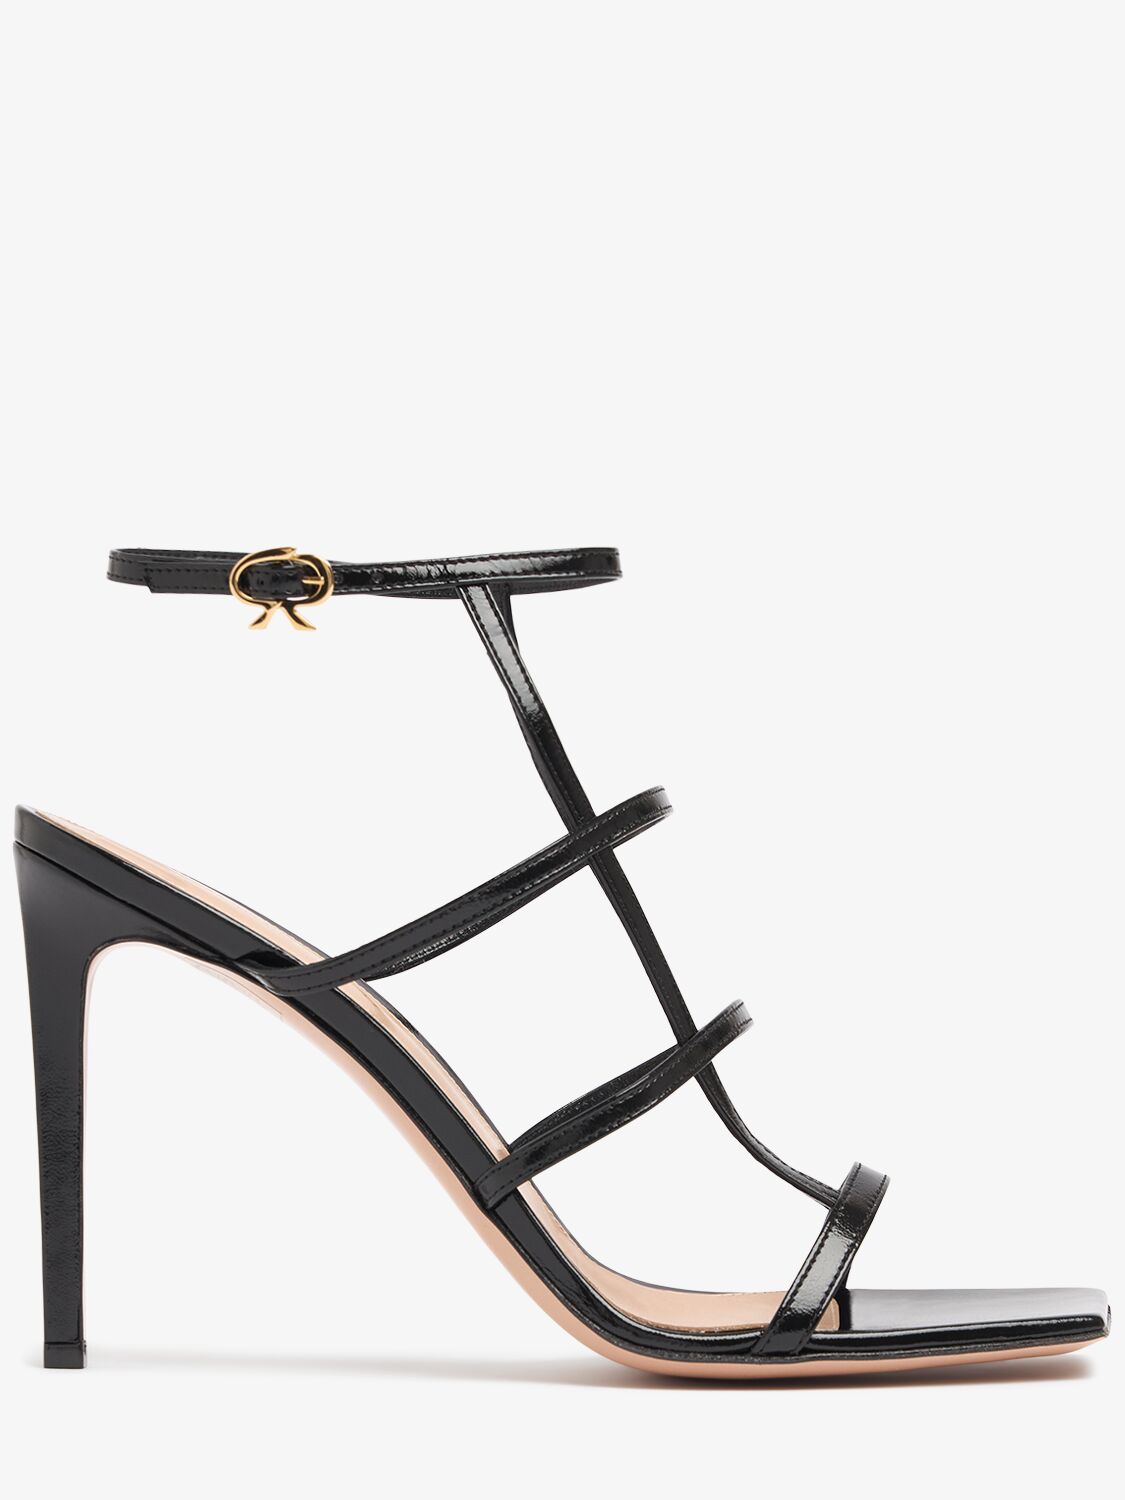 Gianvito Rossi 95mm Leather Sandals In Black